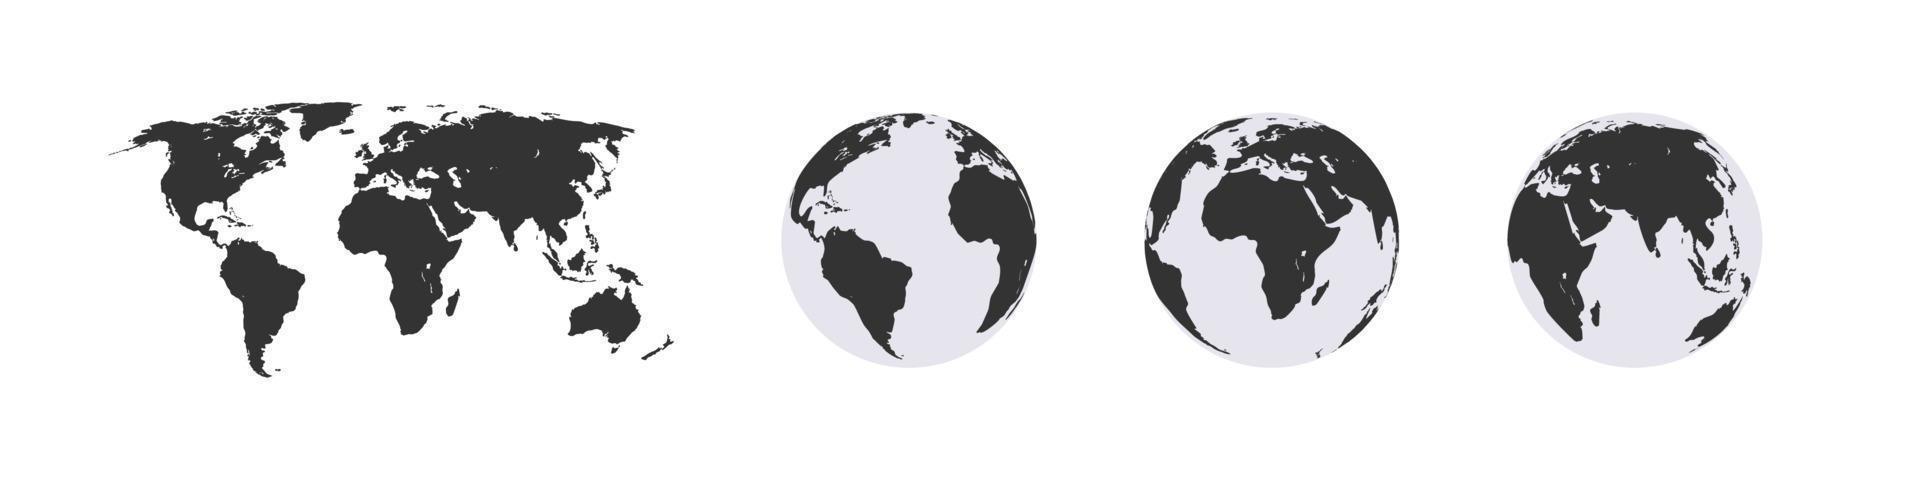 World Map and globes. Globes of Earth. Vector illustration modern simple style